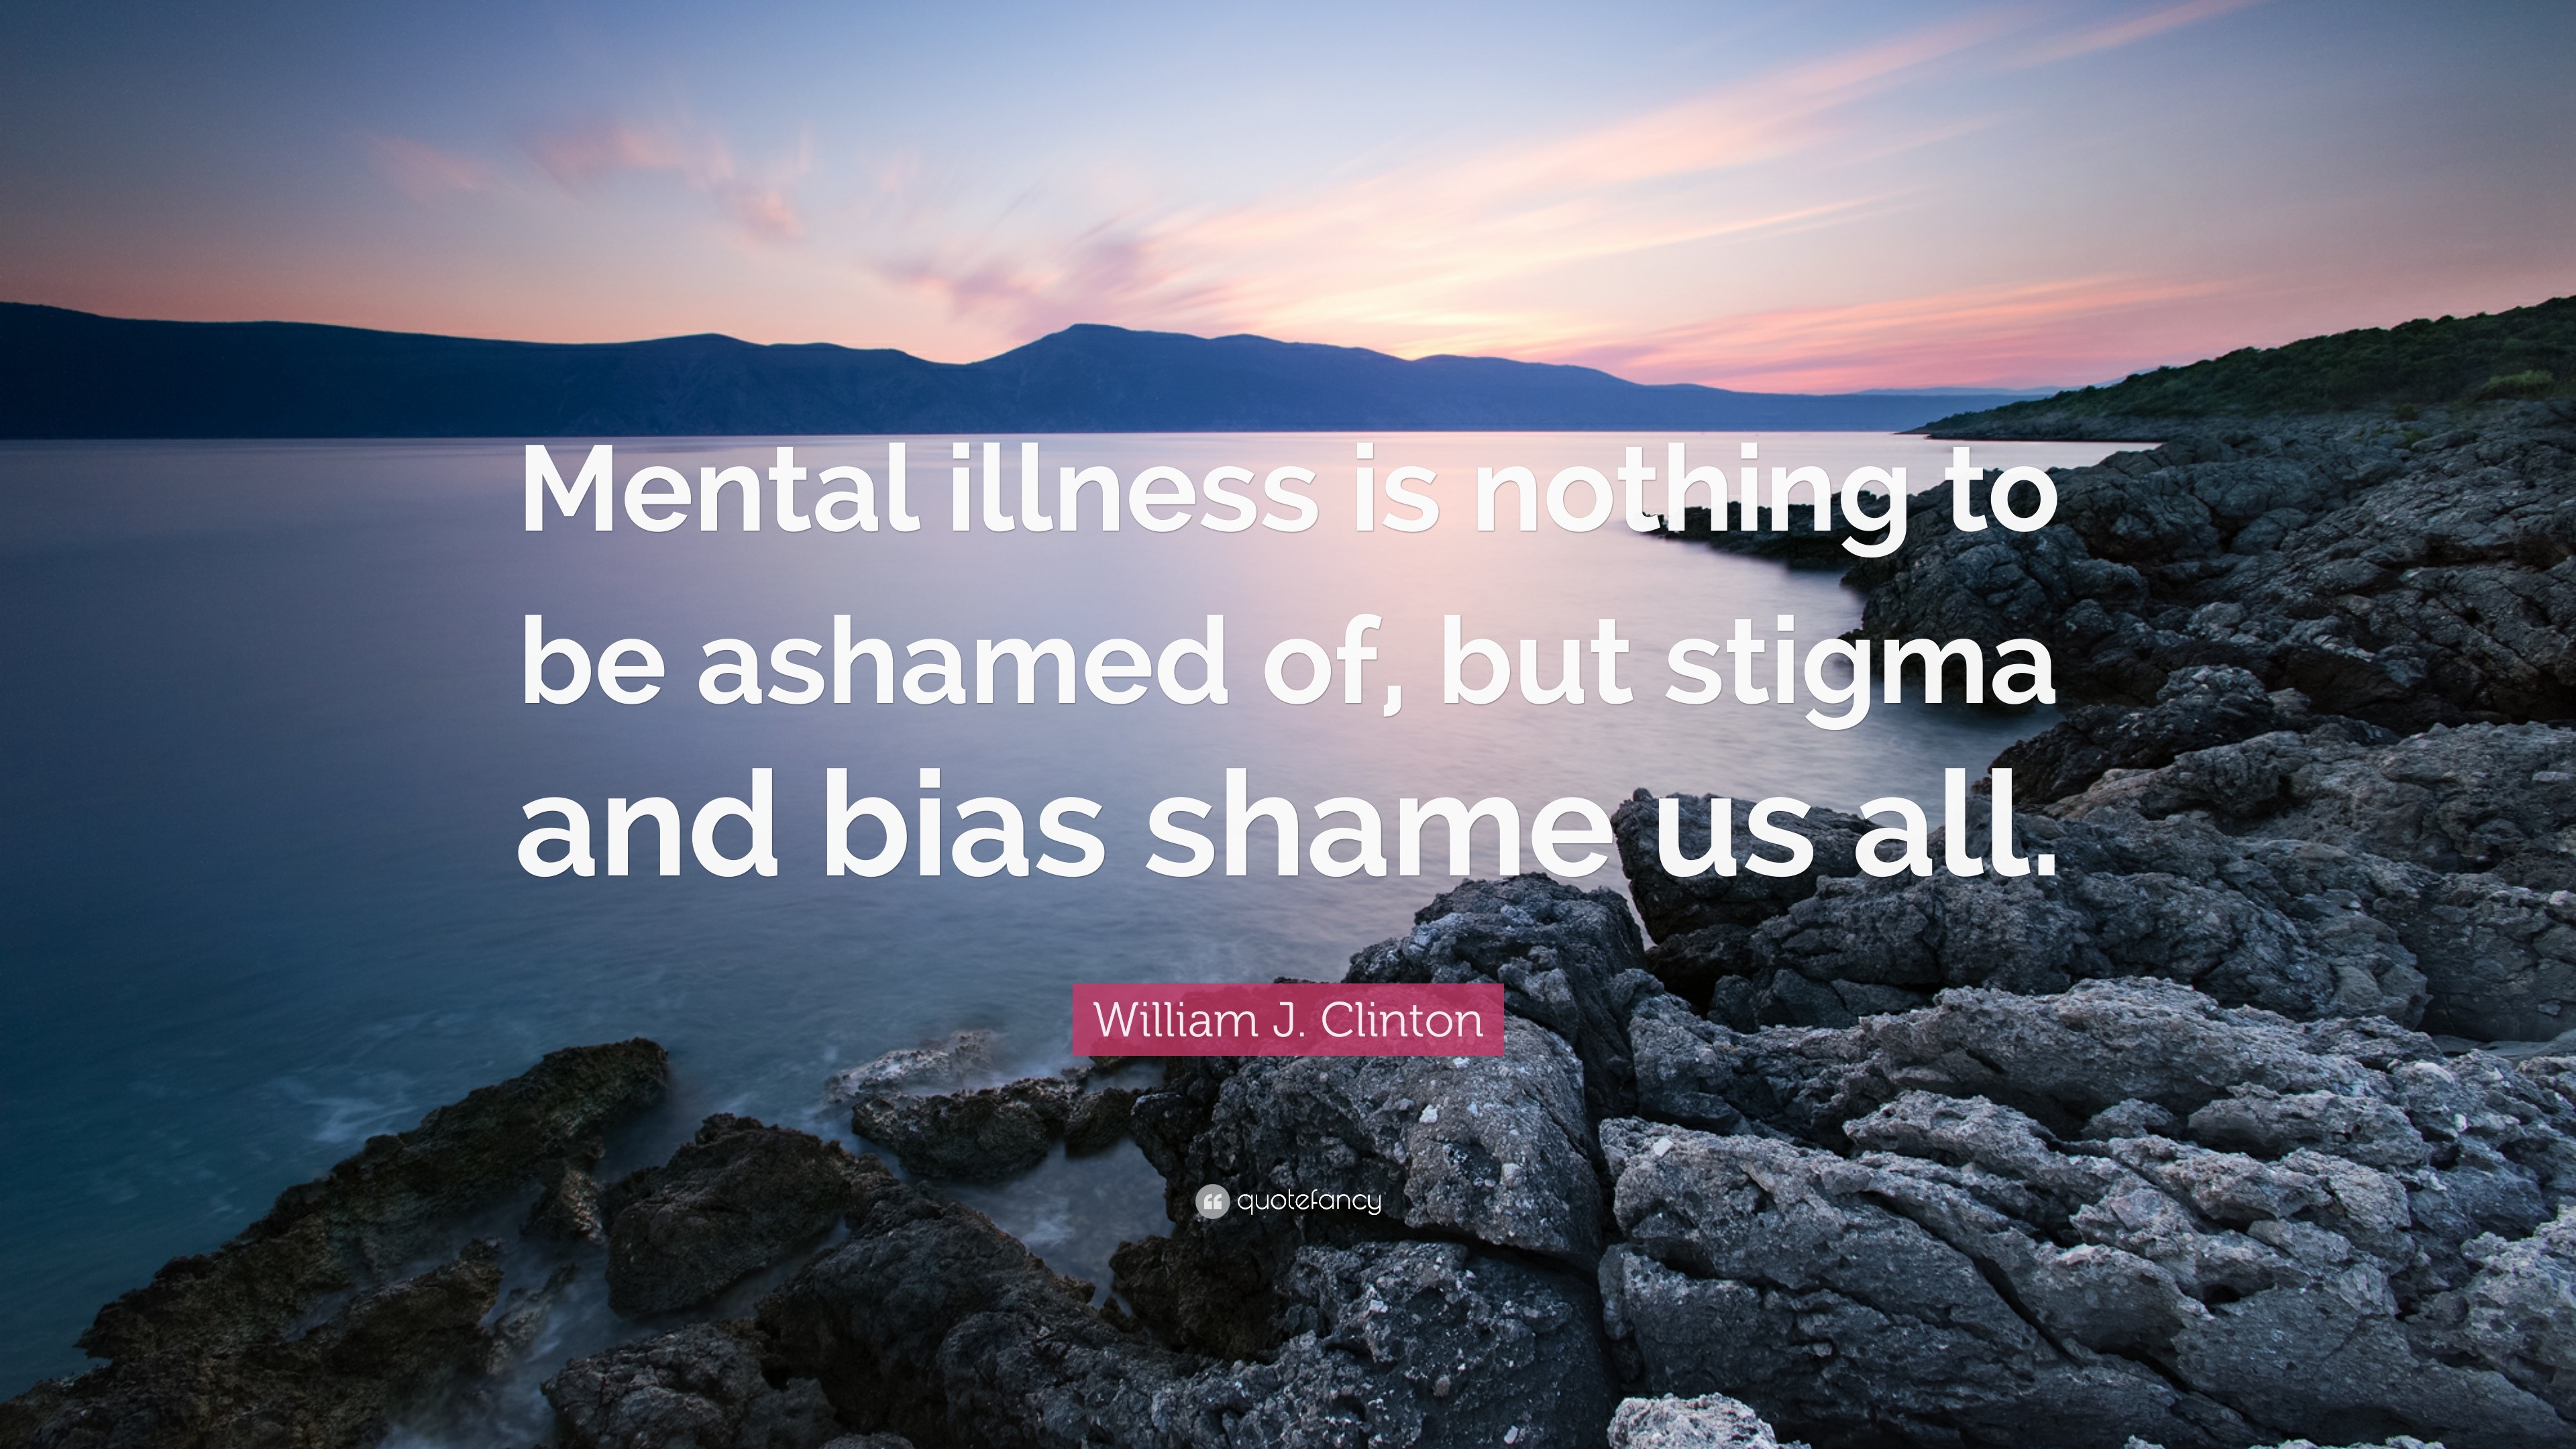 William J Clinton Quote “mental Illness Is Nothing To Be Ashamed Of But Stigma And Bias Shame